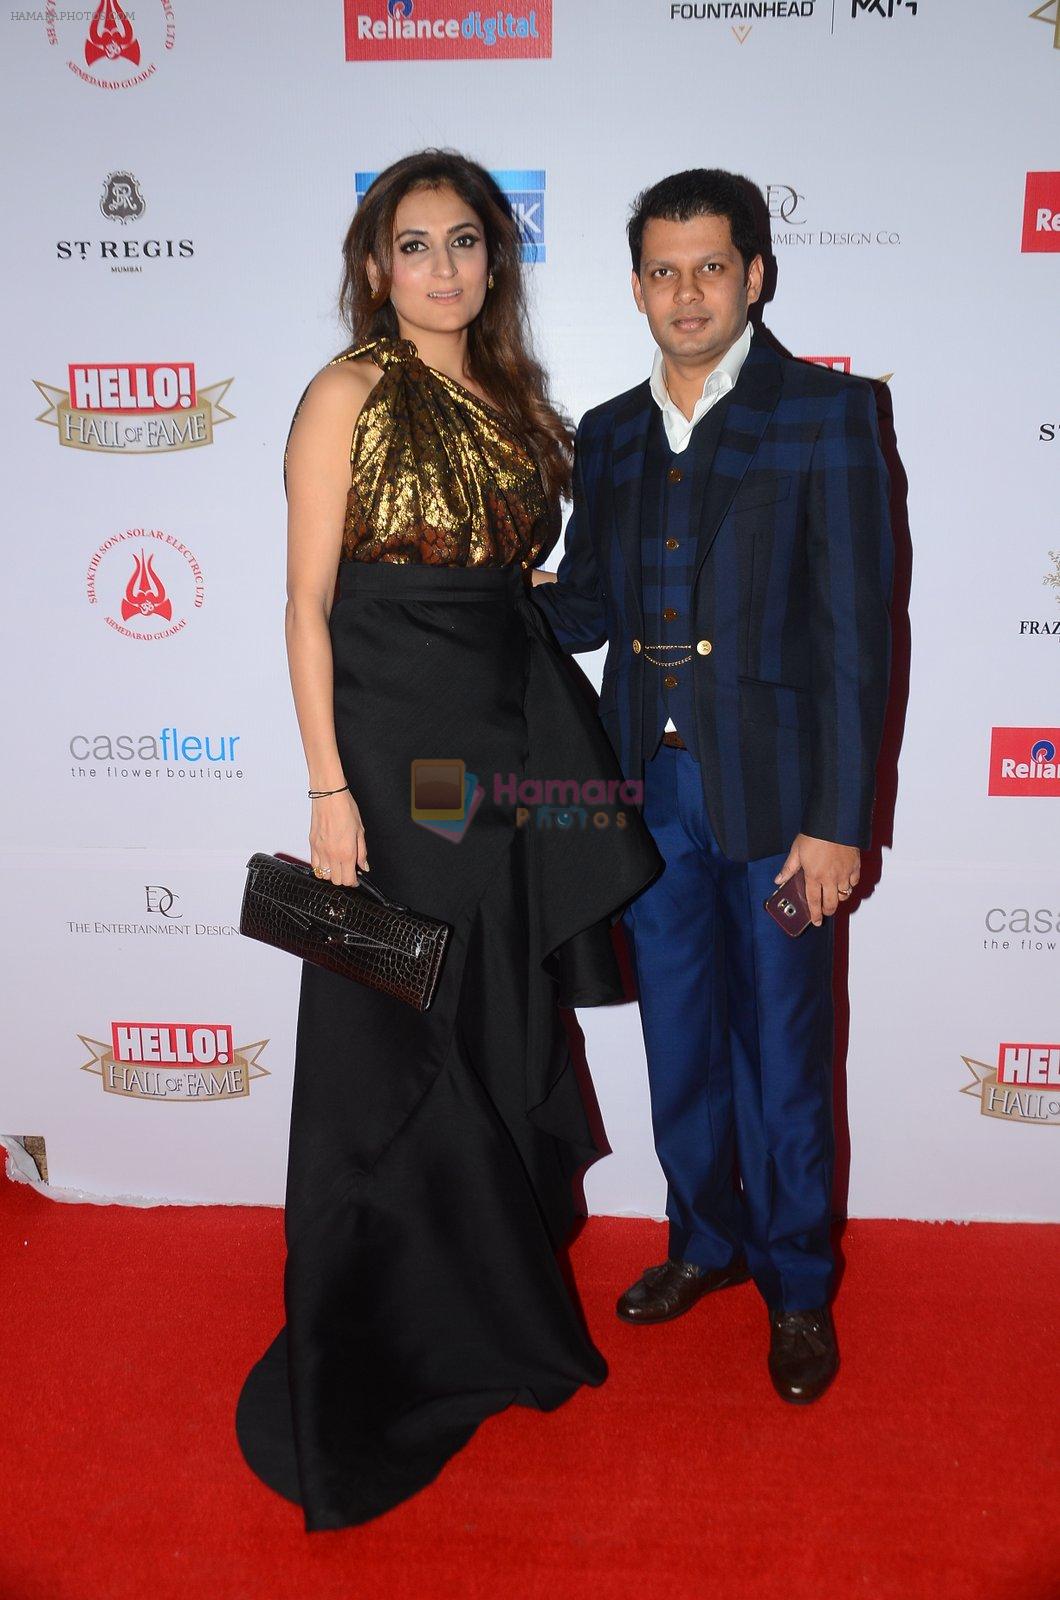 at Hello Hall of Fame Awards 2016 on 11th April 2016